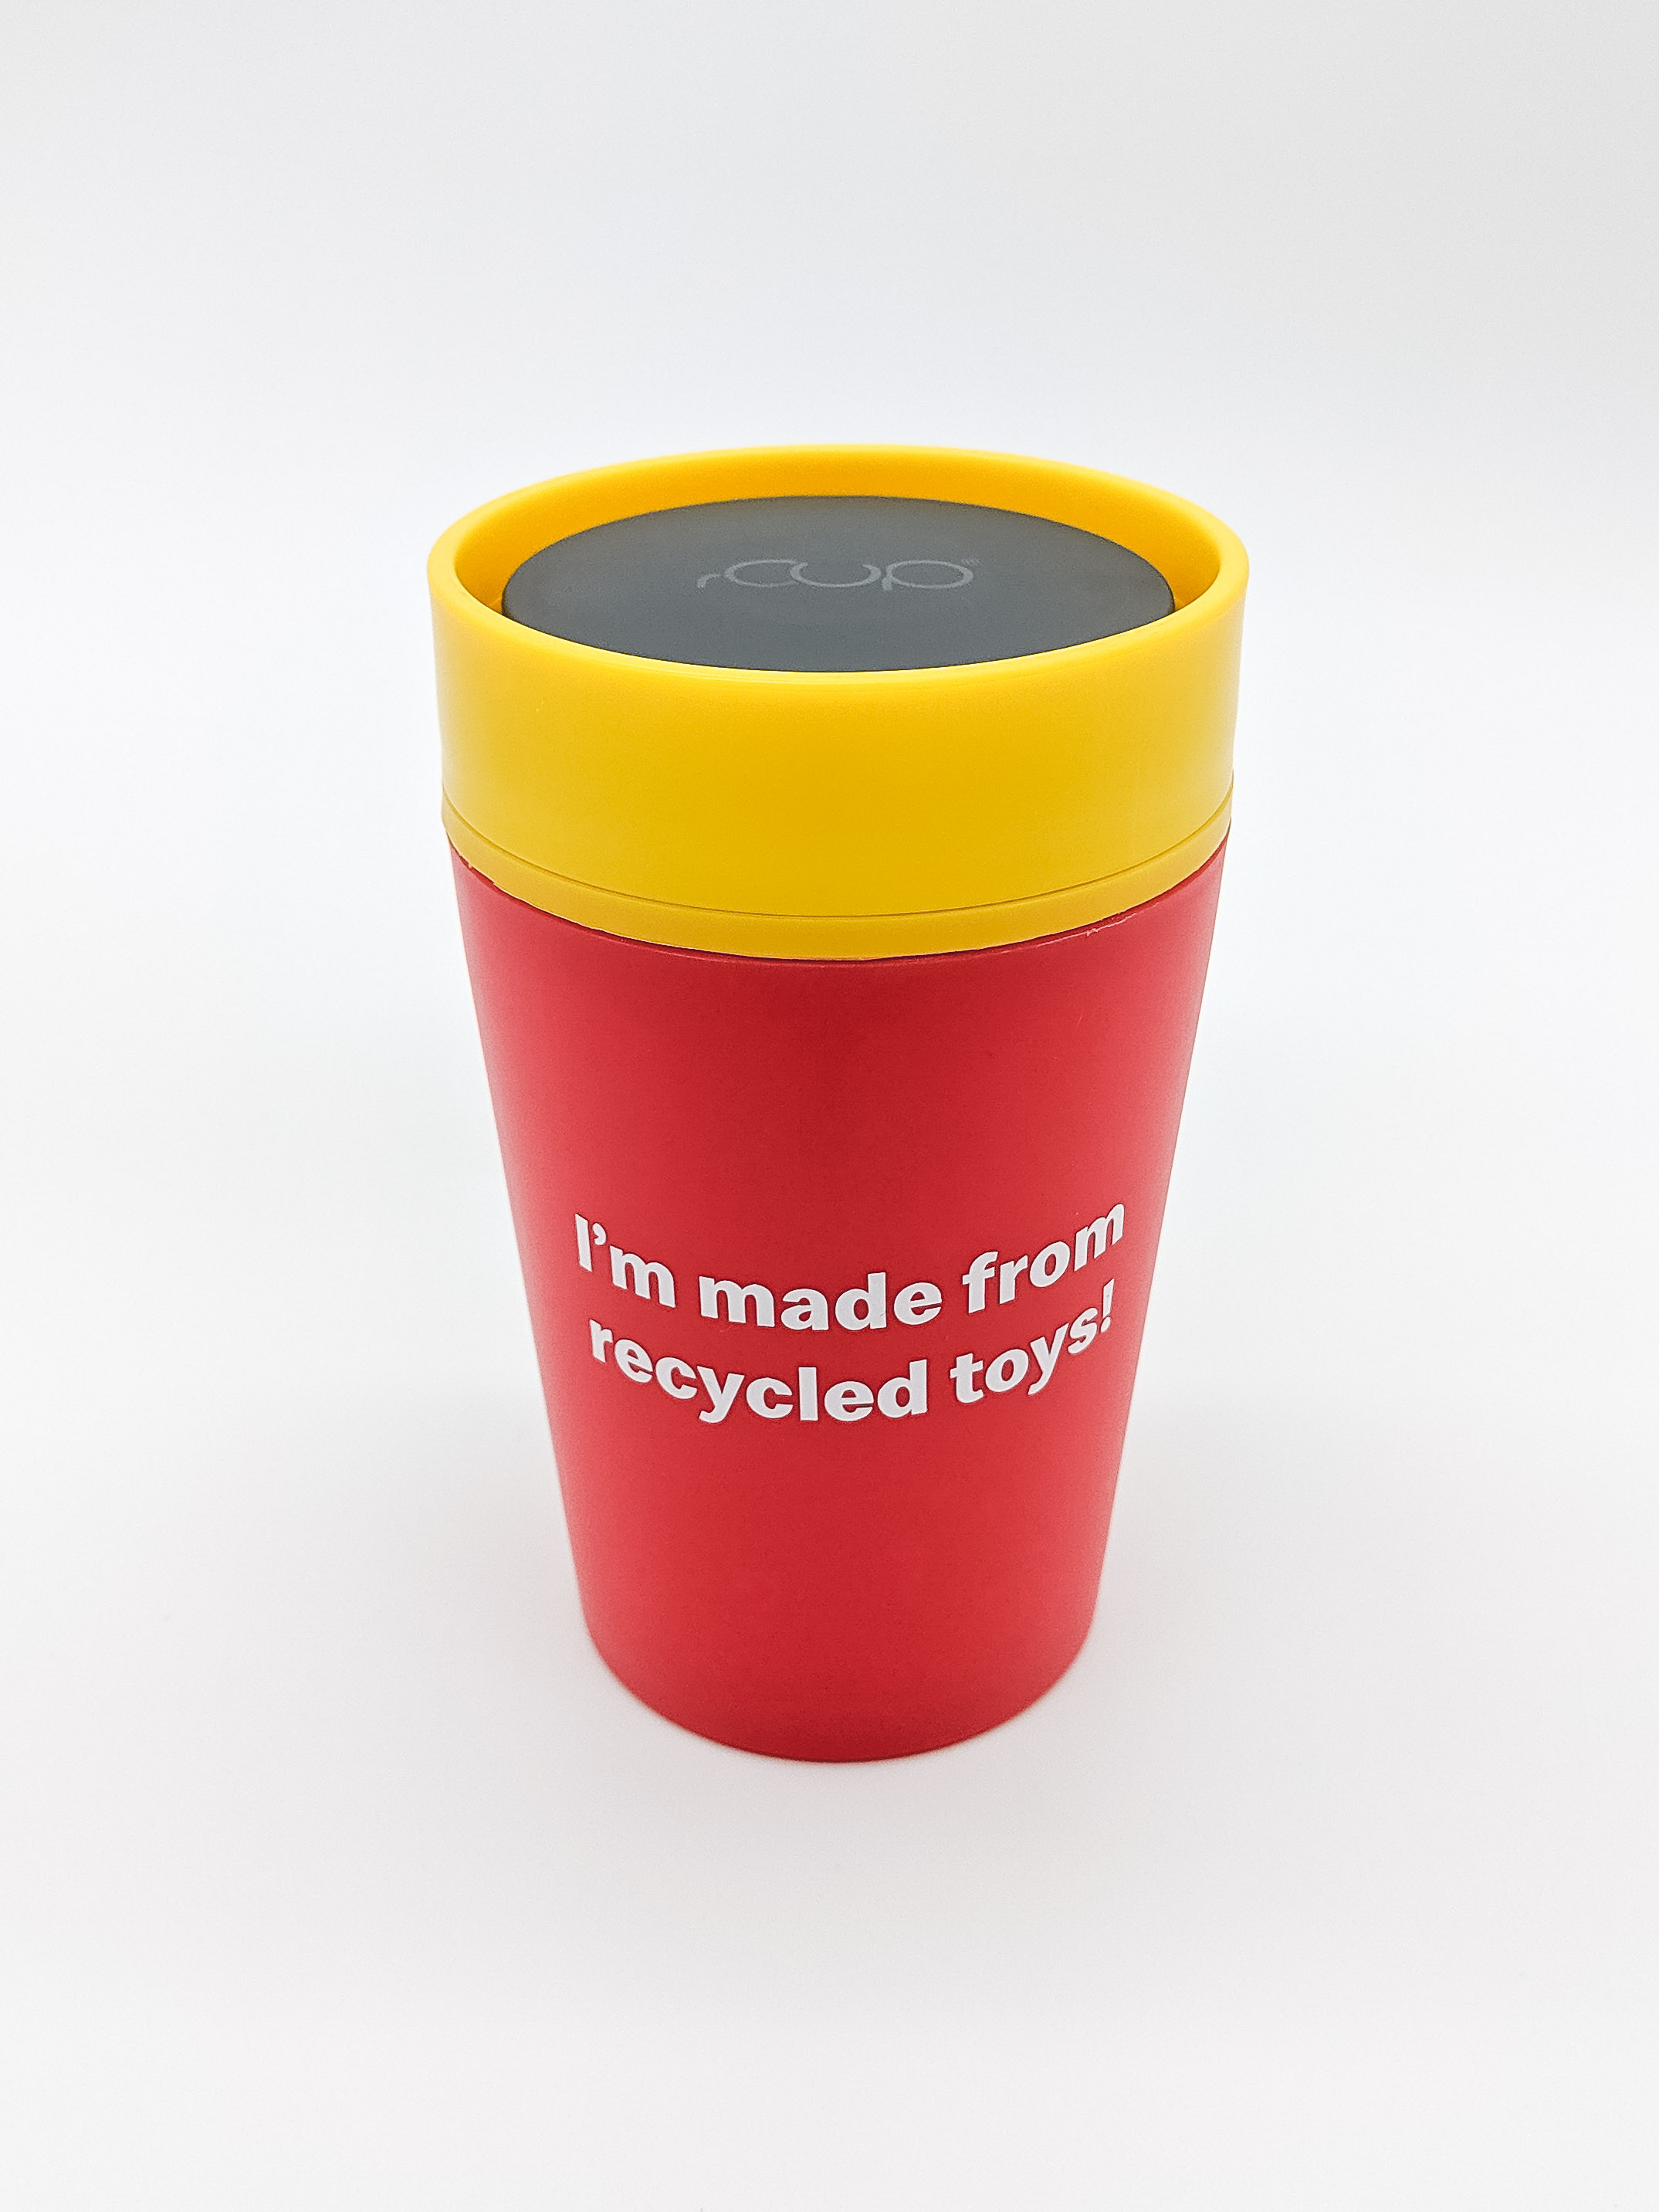 A reusable cup made from recycled toys. (McDonald's/PA)